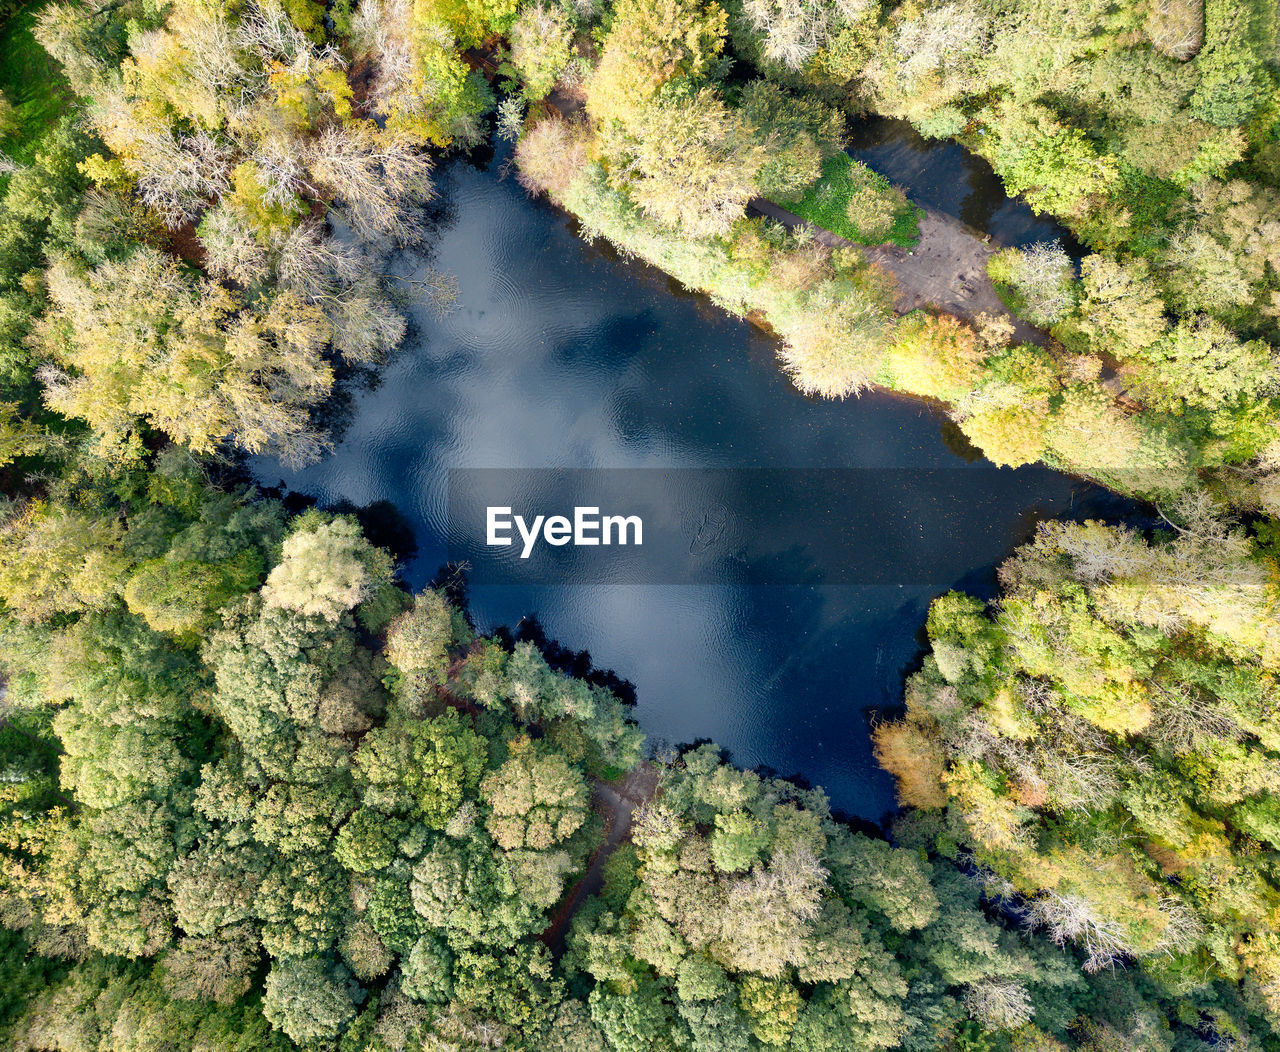 Aerial photo of the segmeertje pond in the meer en bos park in the hague with autumn-coloured trees.